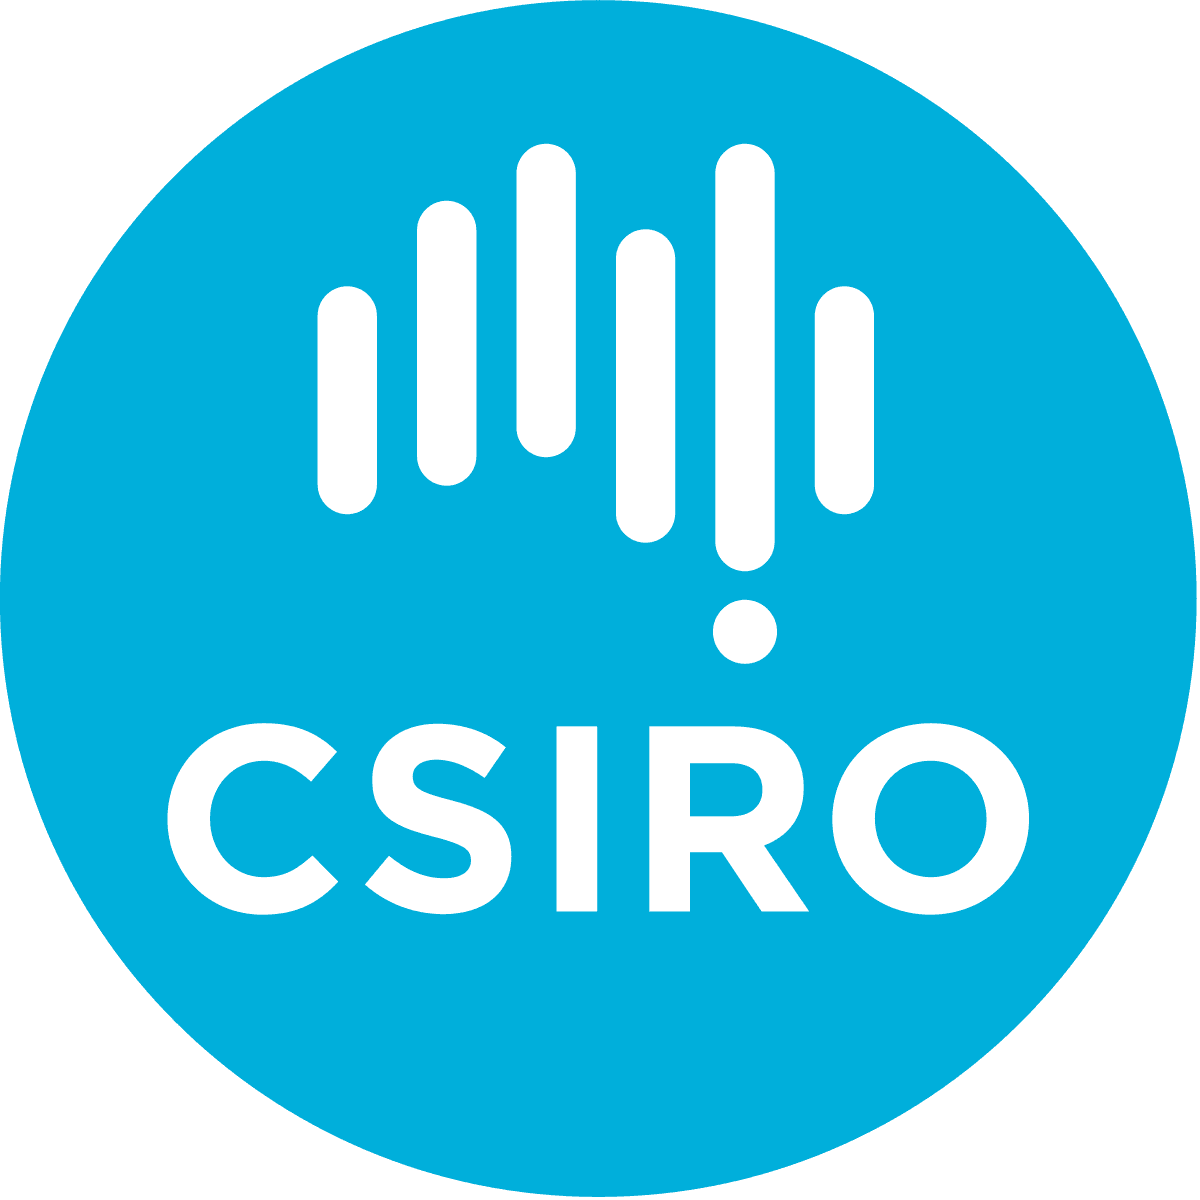 CSIRO (Commonwealth Scientific and Industrial Research Organisation)